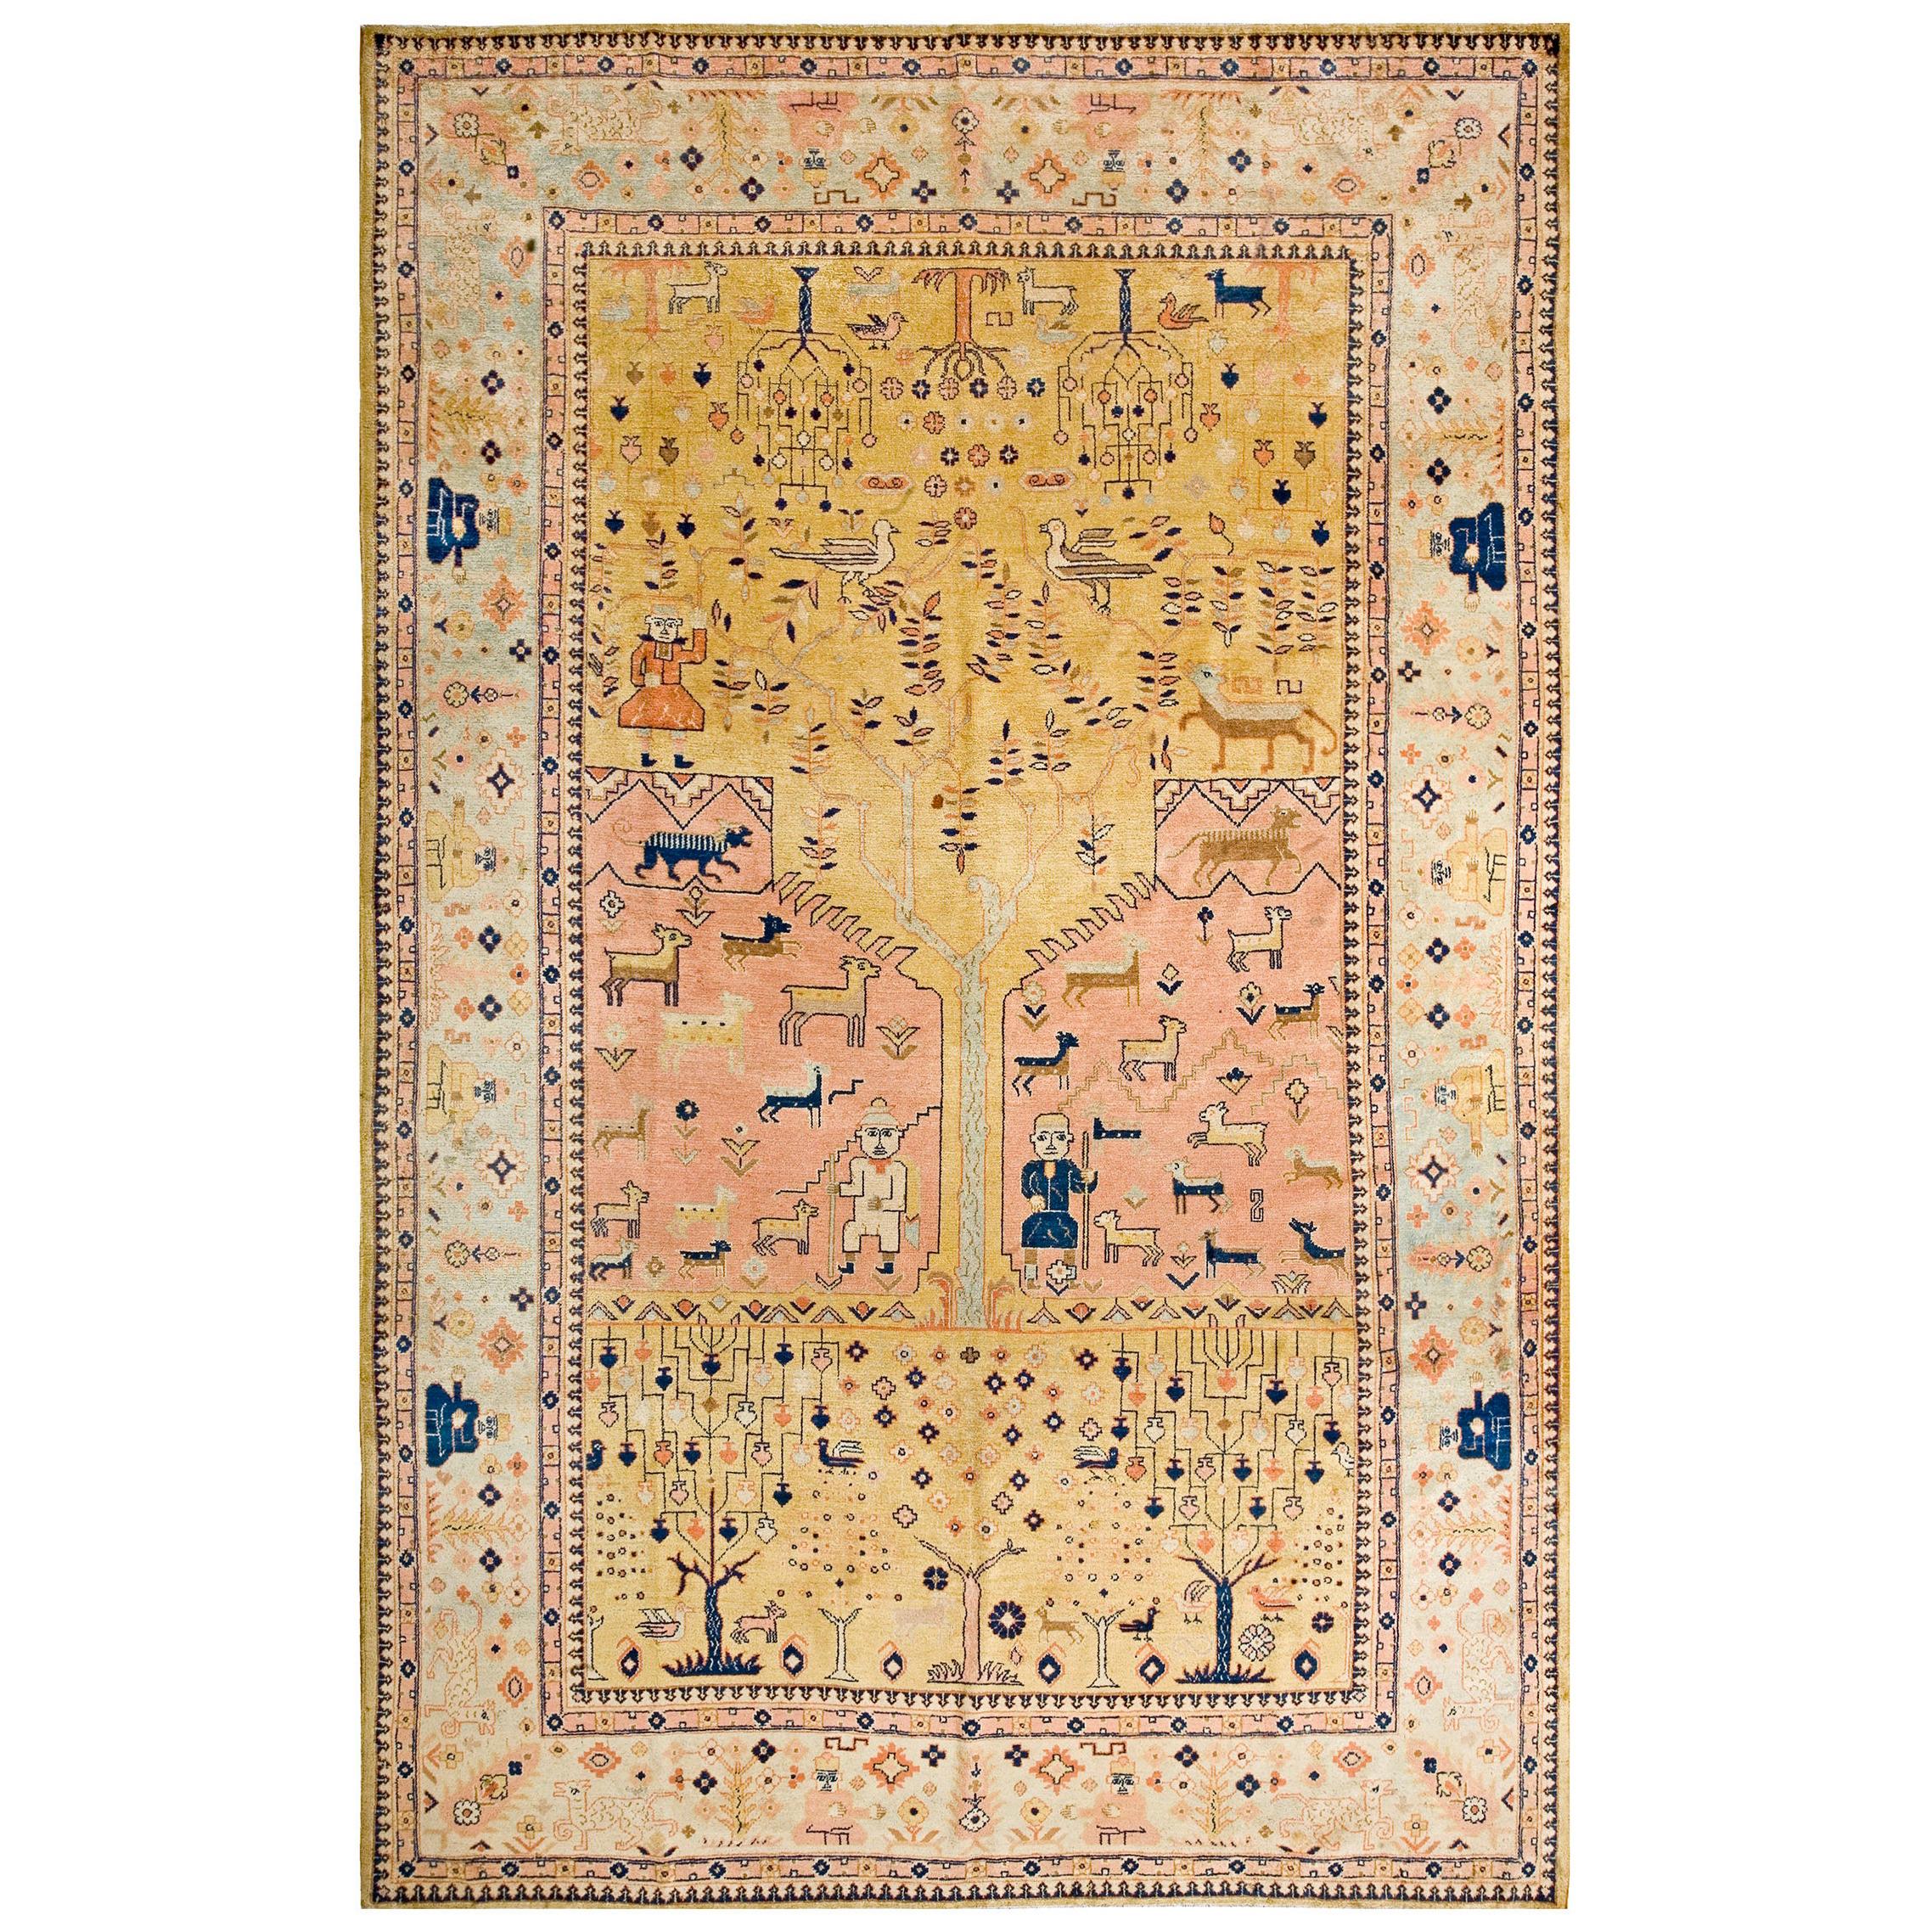 Early 20th Century West Persian Senneh Carpet ( 6'9" x 10'10" - 205 x 330 cm ) For Sale